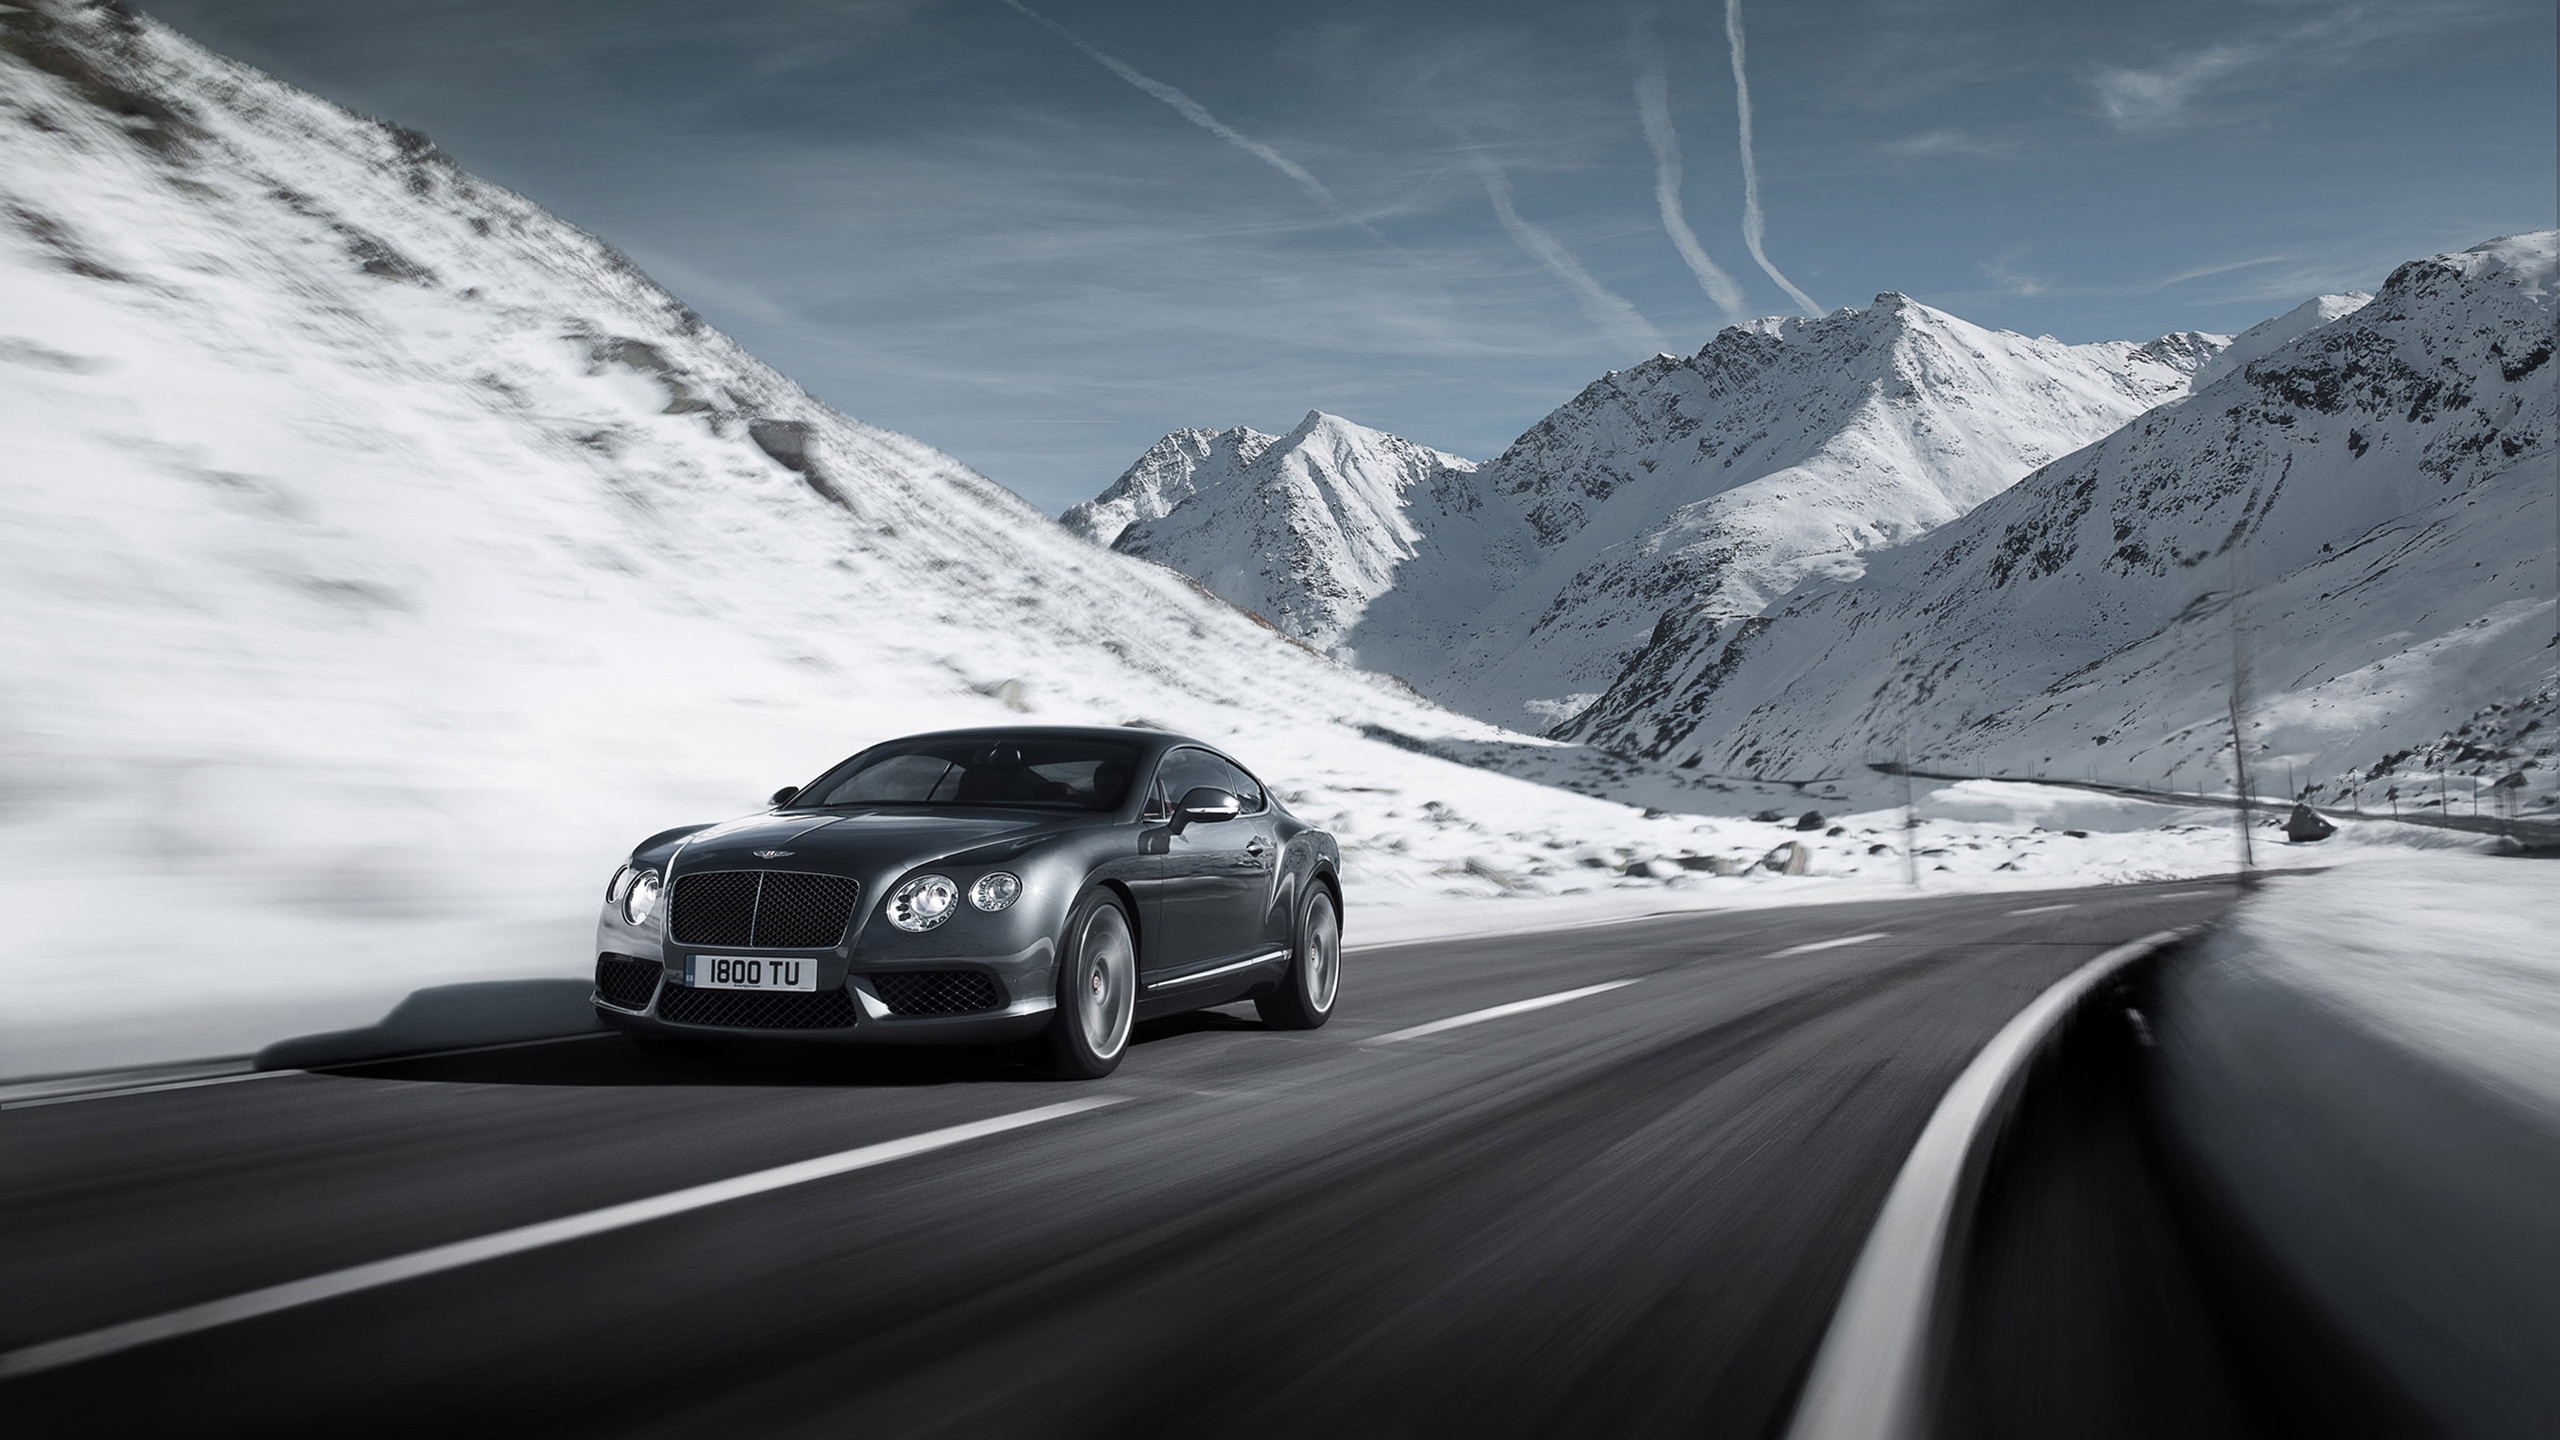 2012 Bentley Continental V8 for 2560x1440 HDTV resolution